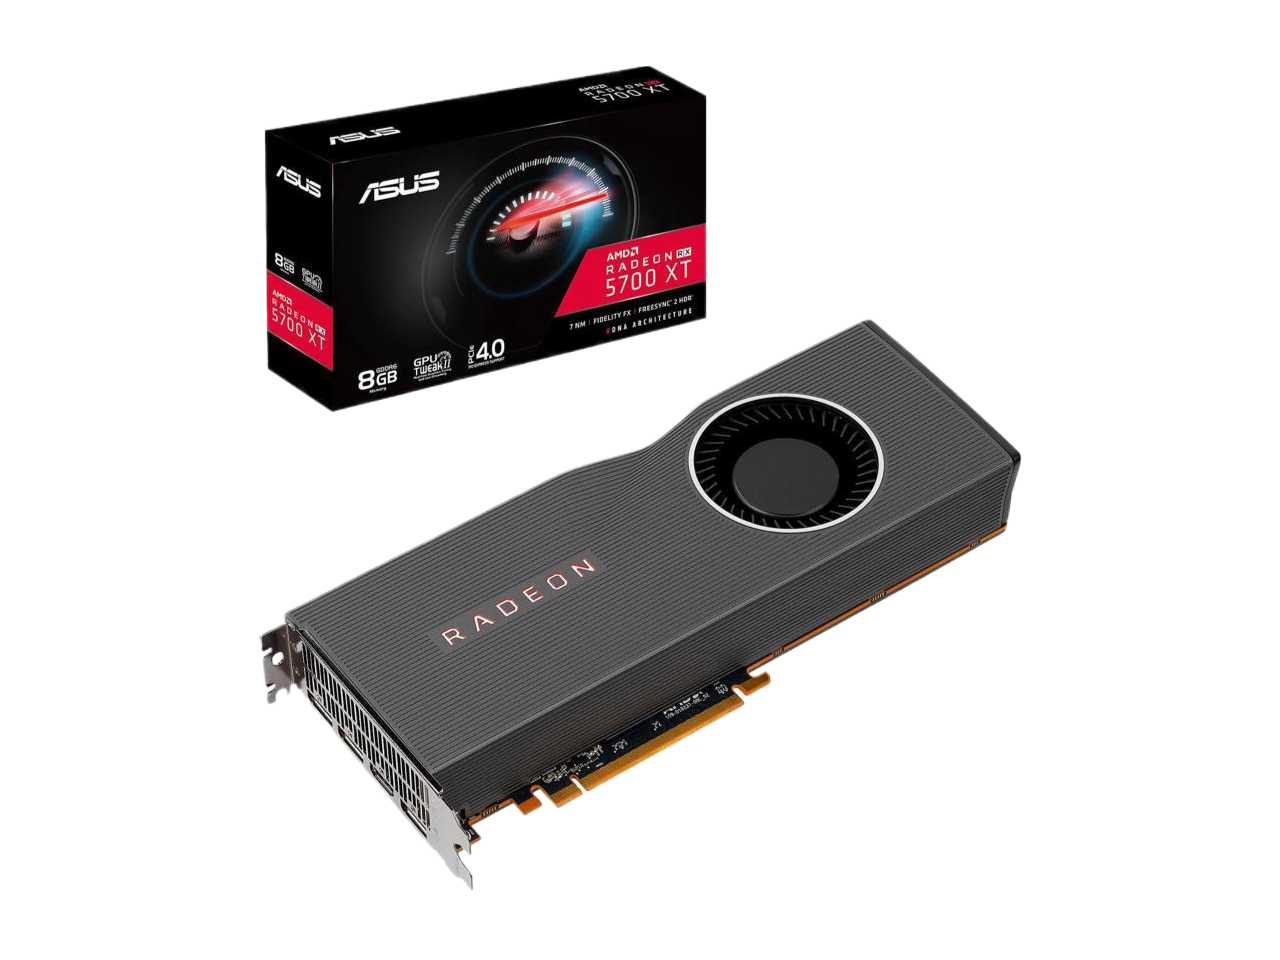 ASUS Radeon RX 5700 XT PCIe 4.0 VR Ready Graphics Card with 8GB GDDR6 Video Graphics Card RX5700XT-8G